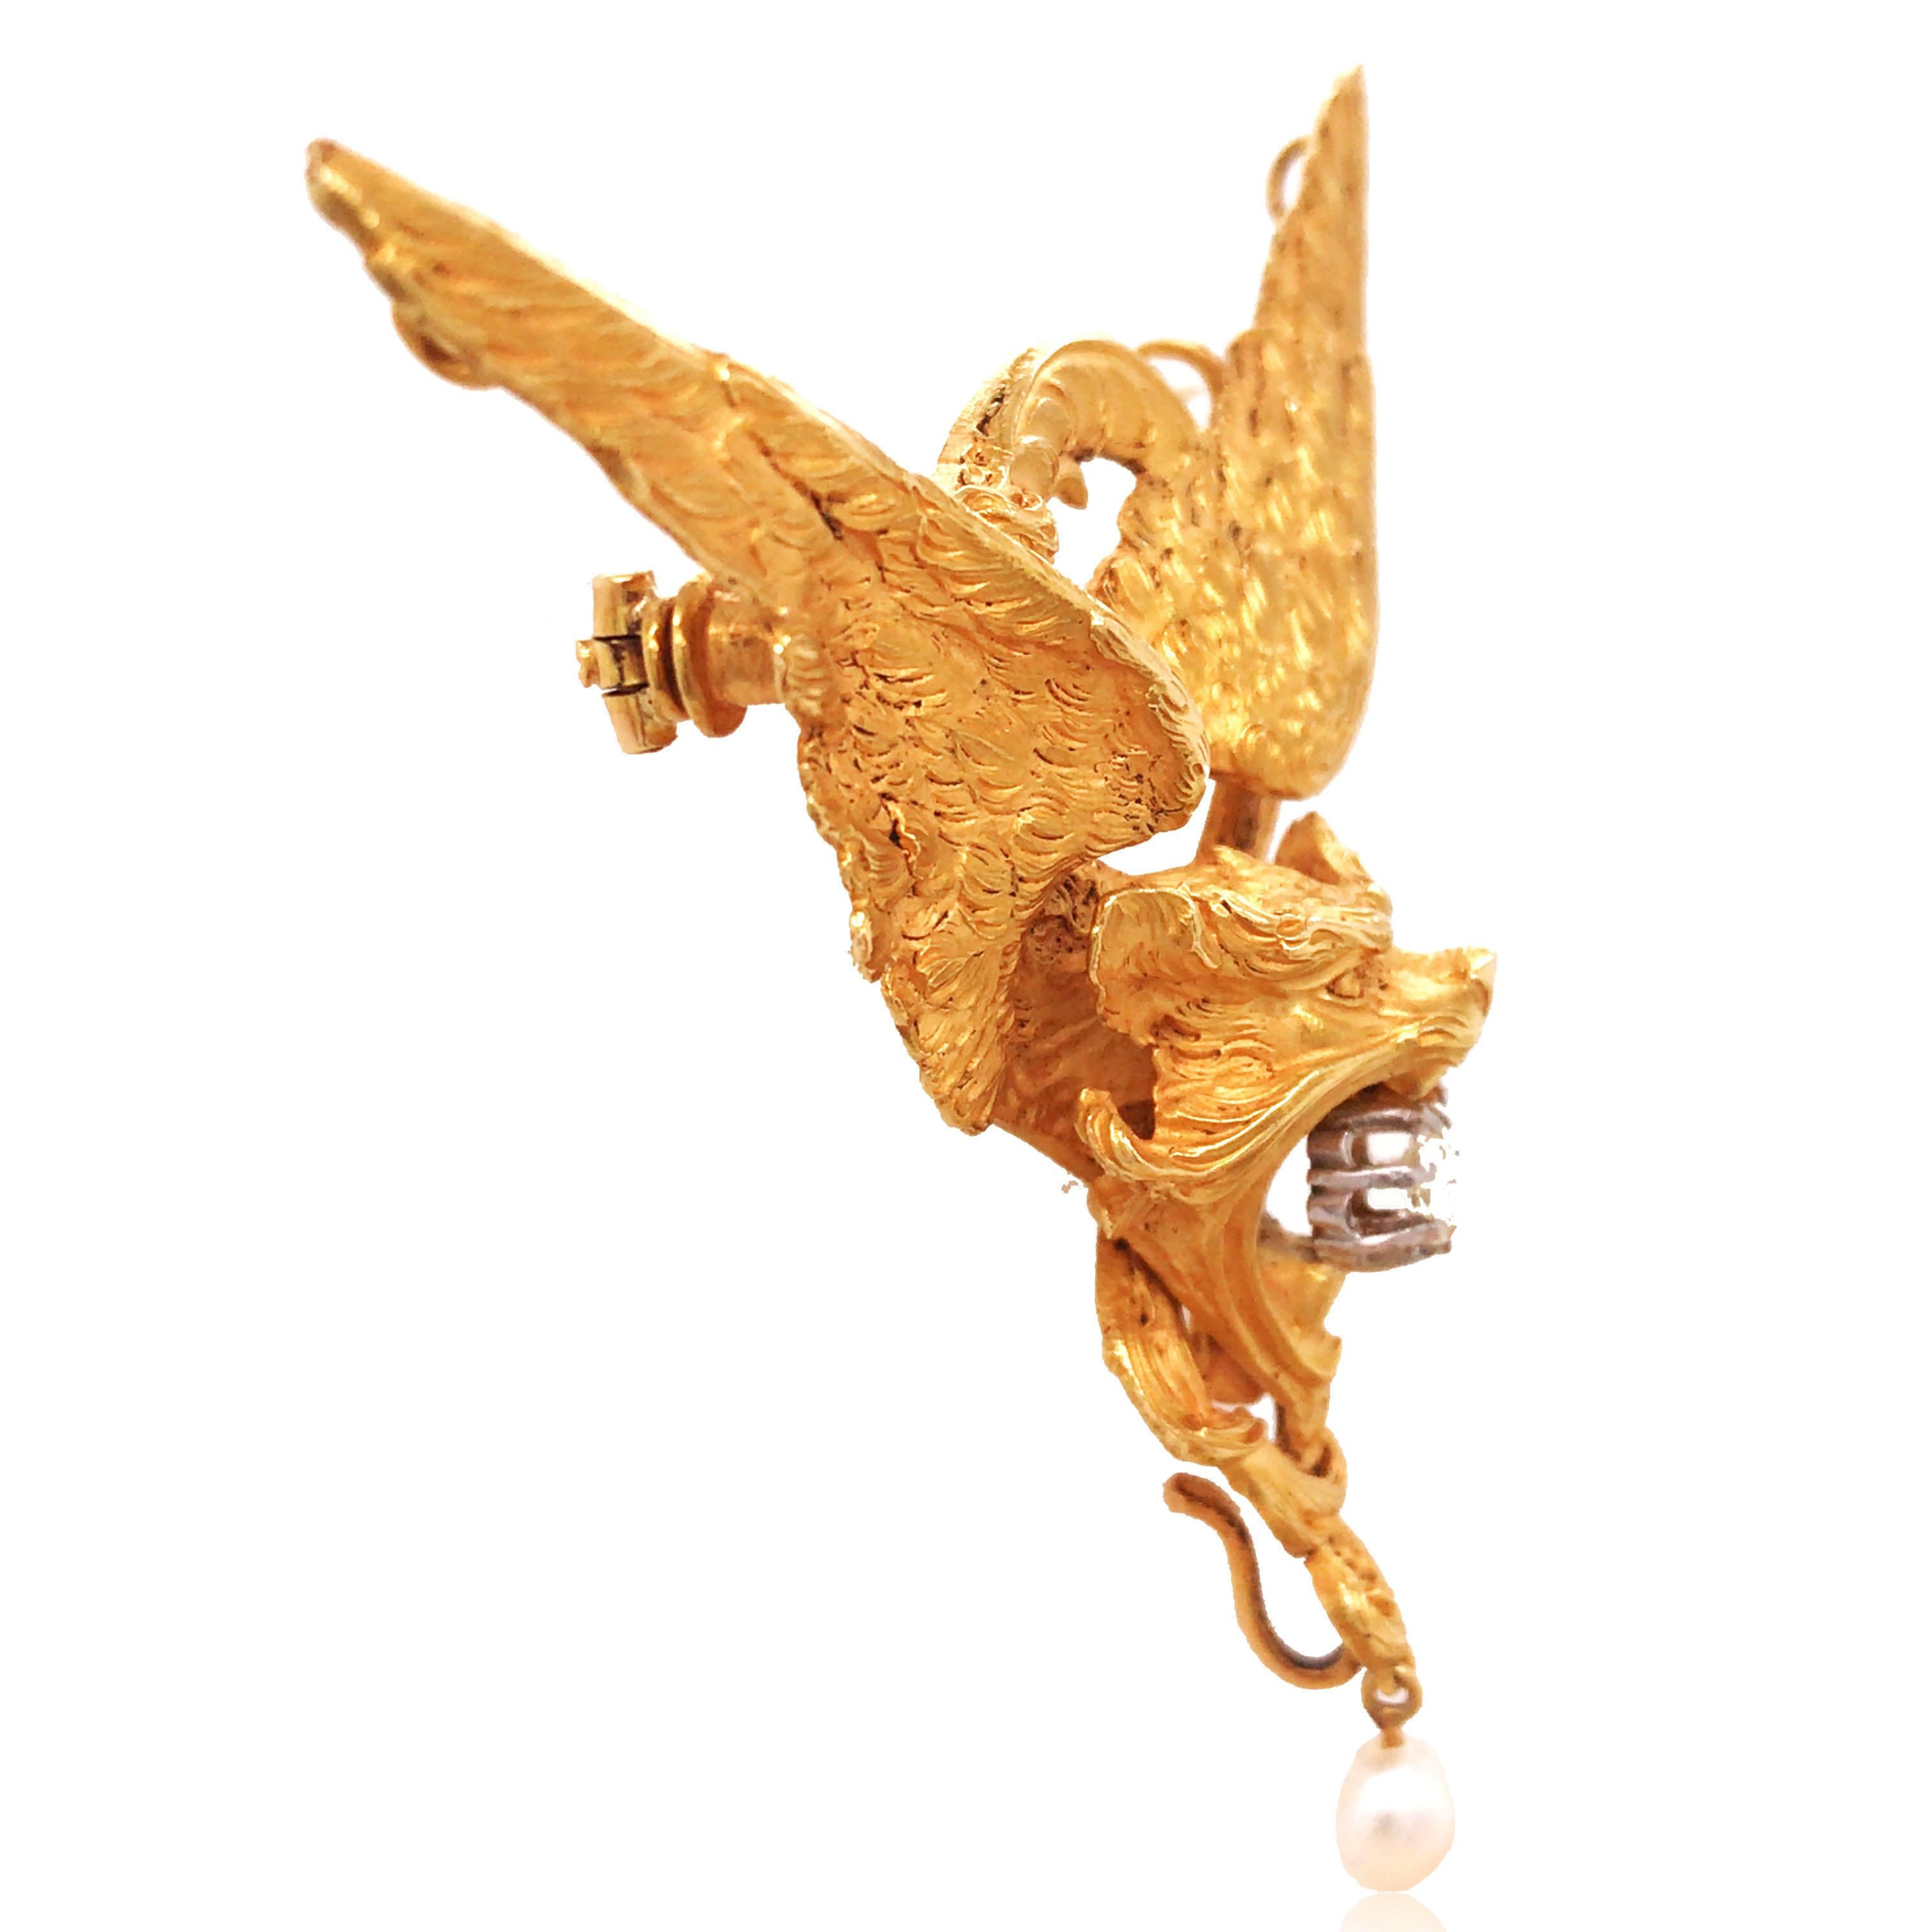 The Victorian Chimera Brooch, a mythological beast in Greek mythology, has the head of a lion, the tail of a snake, the body of a sheep, and the wings of an eagle. Chimera, which stands for strength and guardianship, is a common theme of